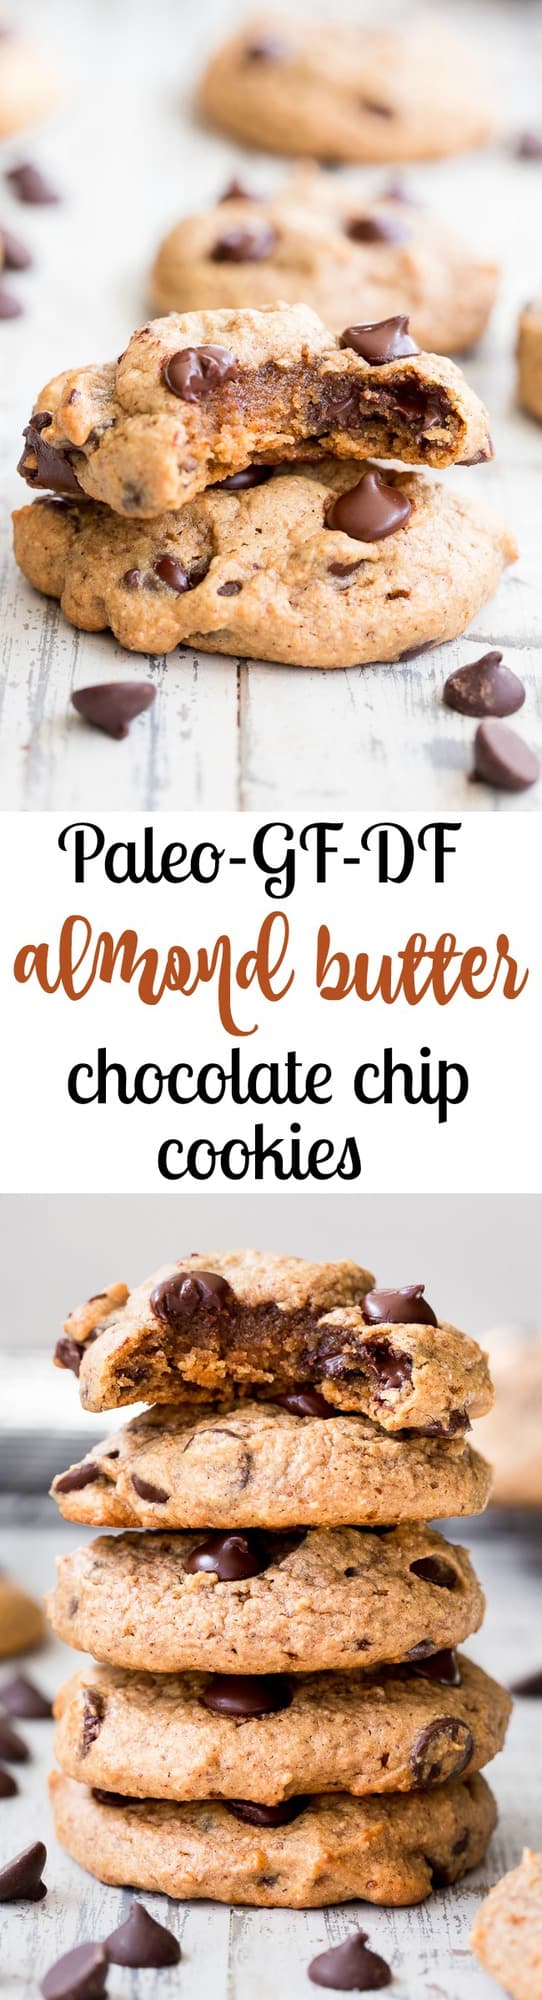 These chewy paleo chocolate chip cookies are a breeze to make, kid approved and the perfect go-to healthy dessert.  They're loaded with good fats, super chewy and thick, with great nutty flavor thanks to the almond butter!   Grab one for an after school snack or serve to a crowd - these chewy chocolate chip cookies are sure to be a hit.